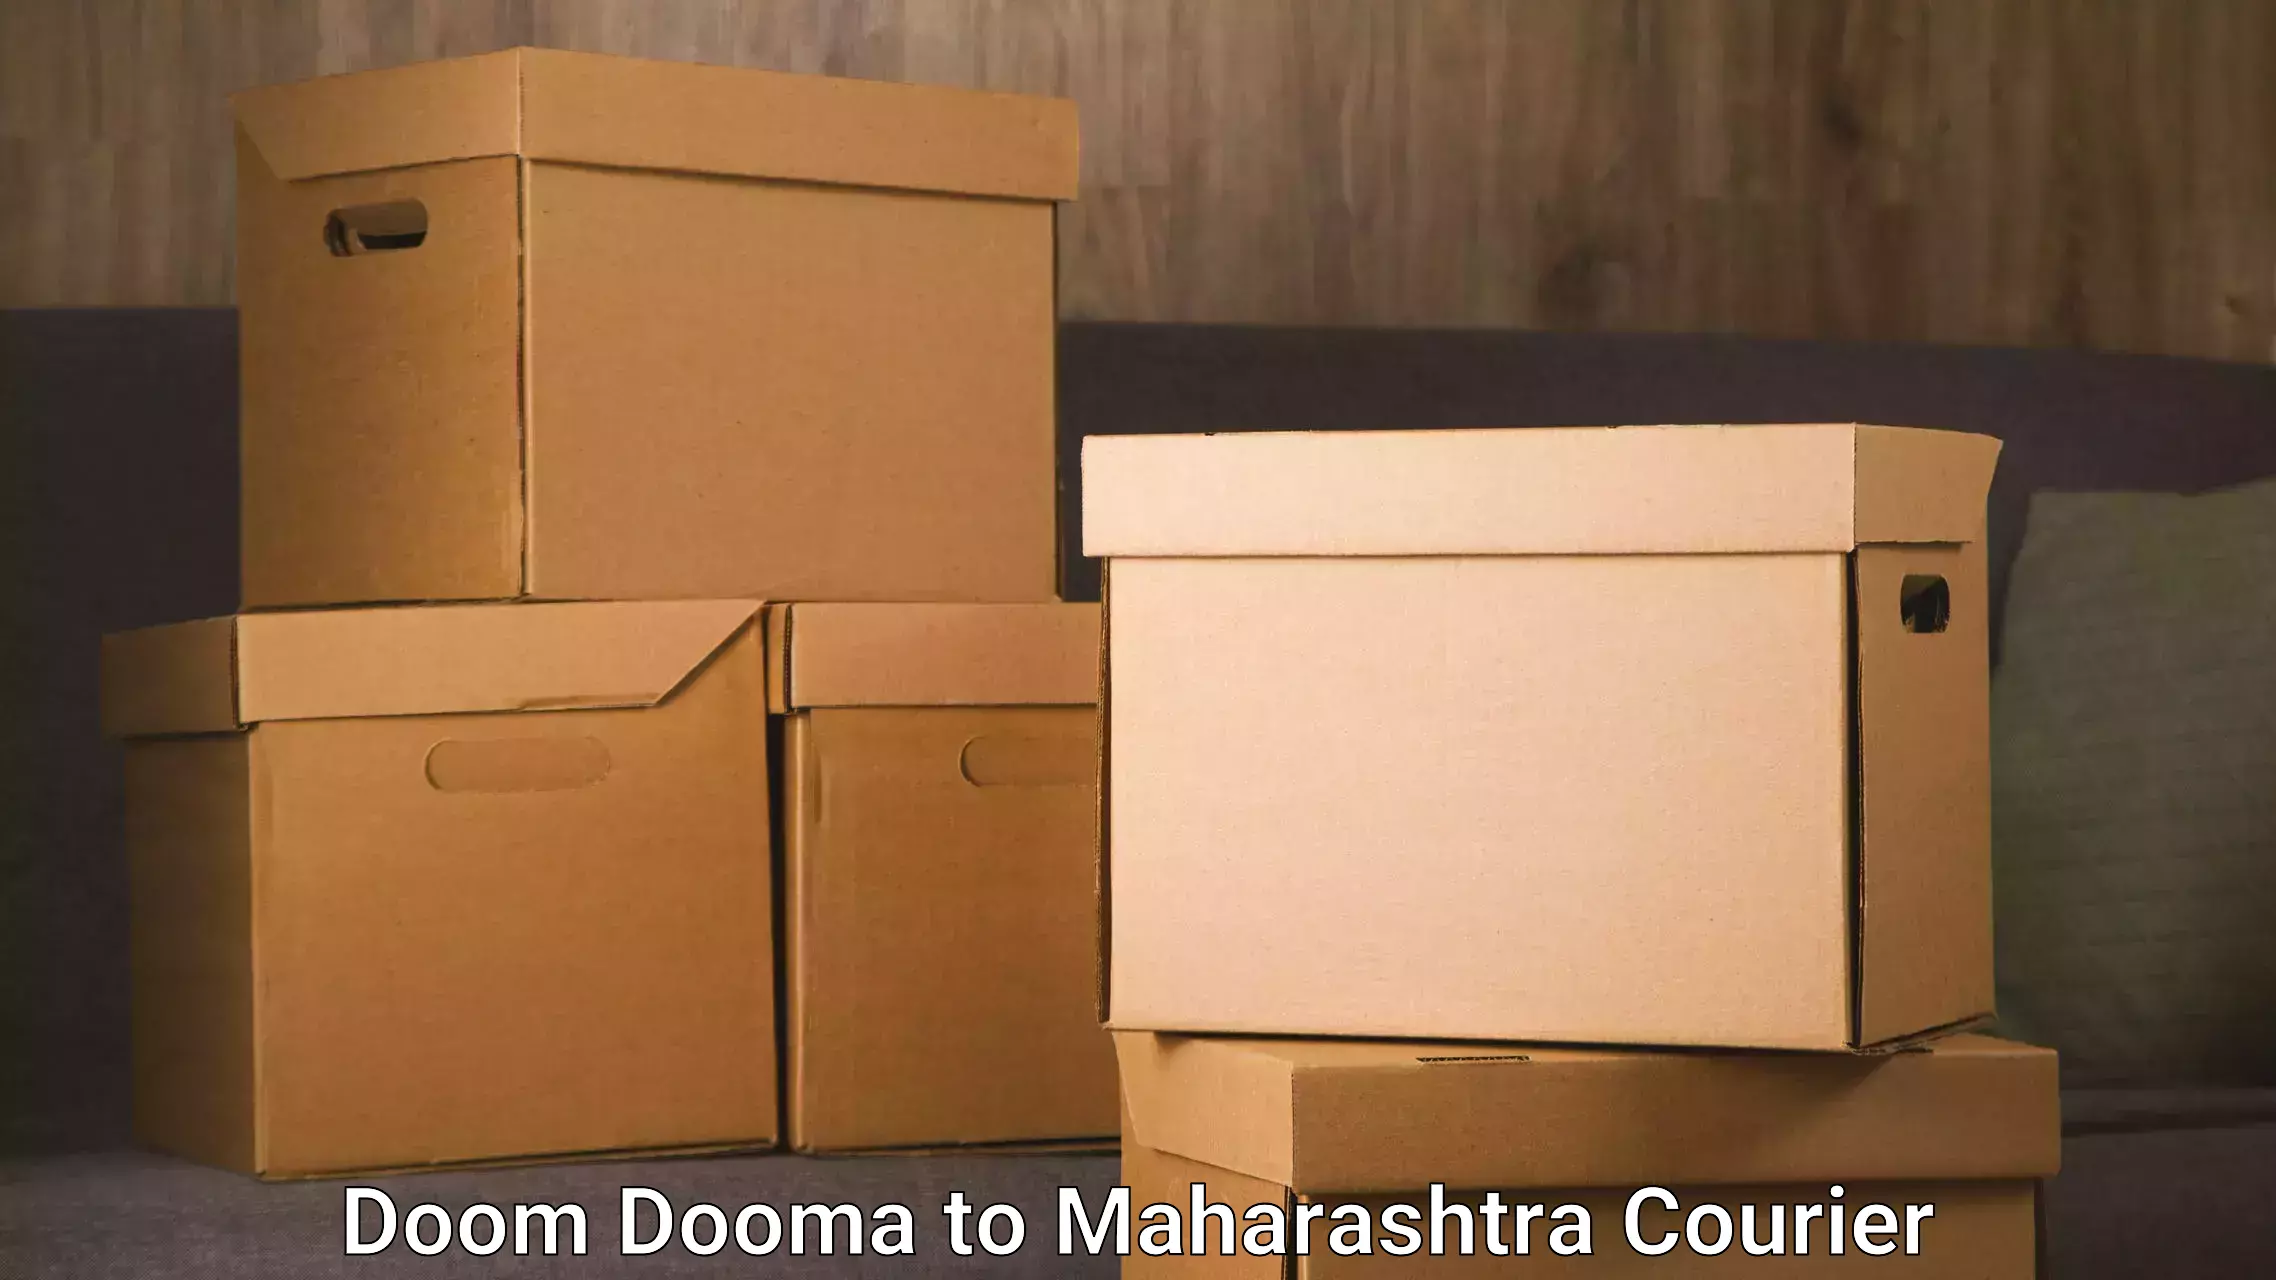 Global shipping solutions Doom Dooma to Solapur